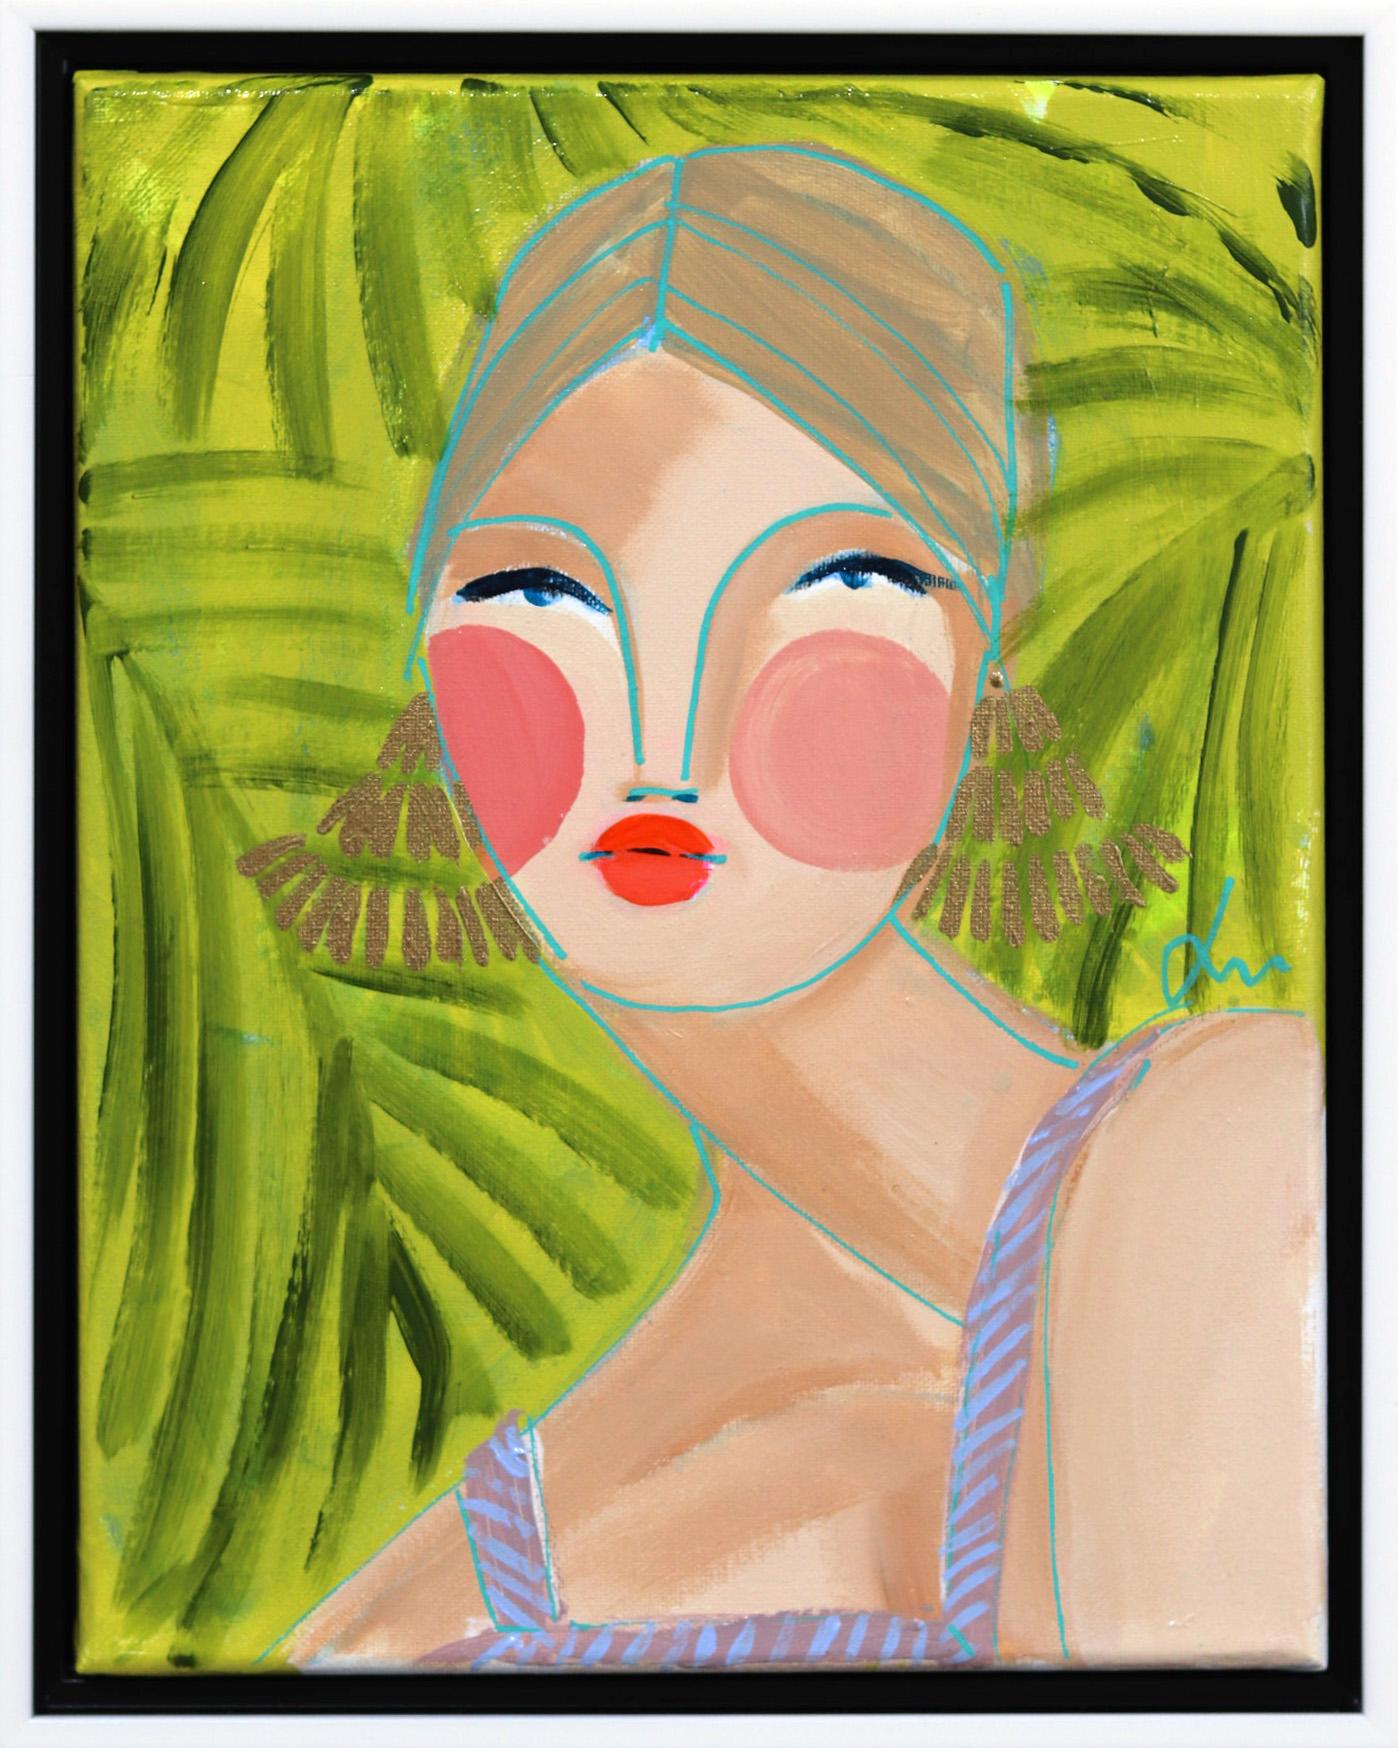 Lindsey McCord Portrait Painting - Miss Priss Palms 1 - Colorful Abstract Figurative Portrait Original Painting